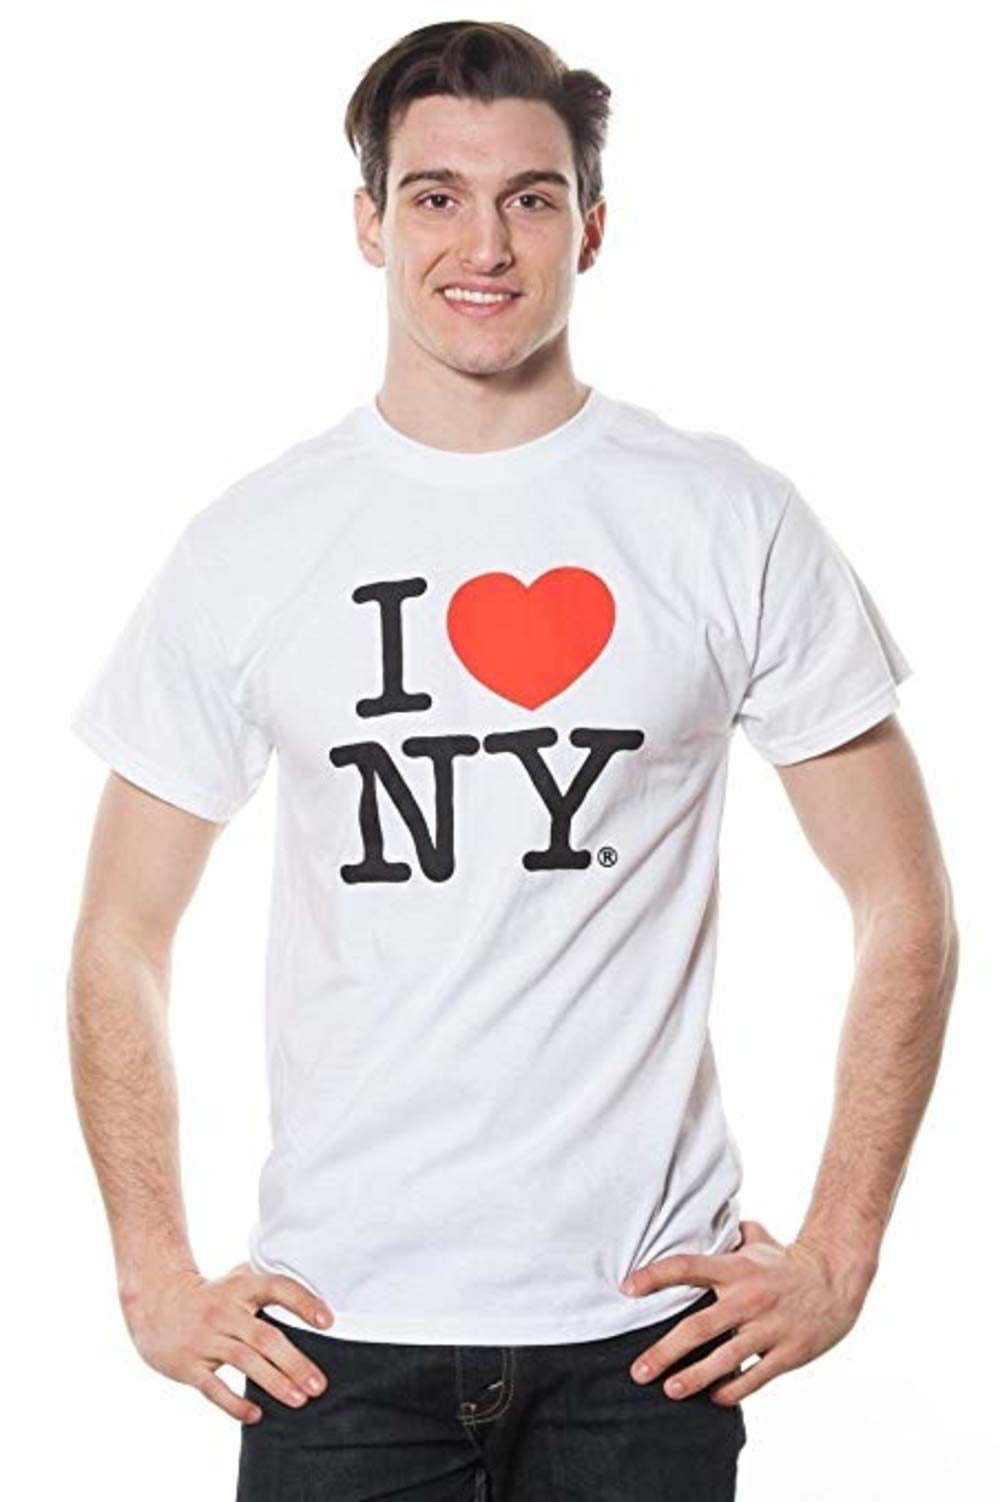 I Love NY Charcoal T-Shirt Unisex Tee Licensed Official 